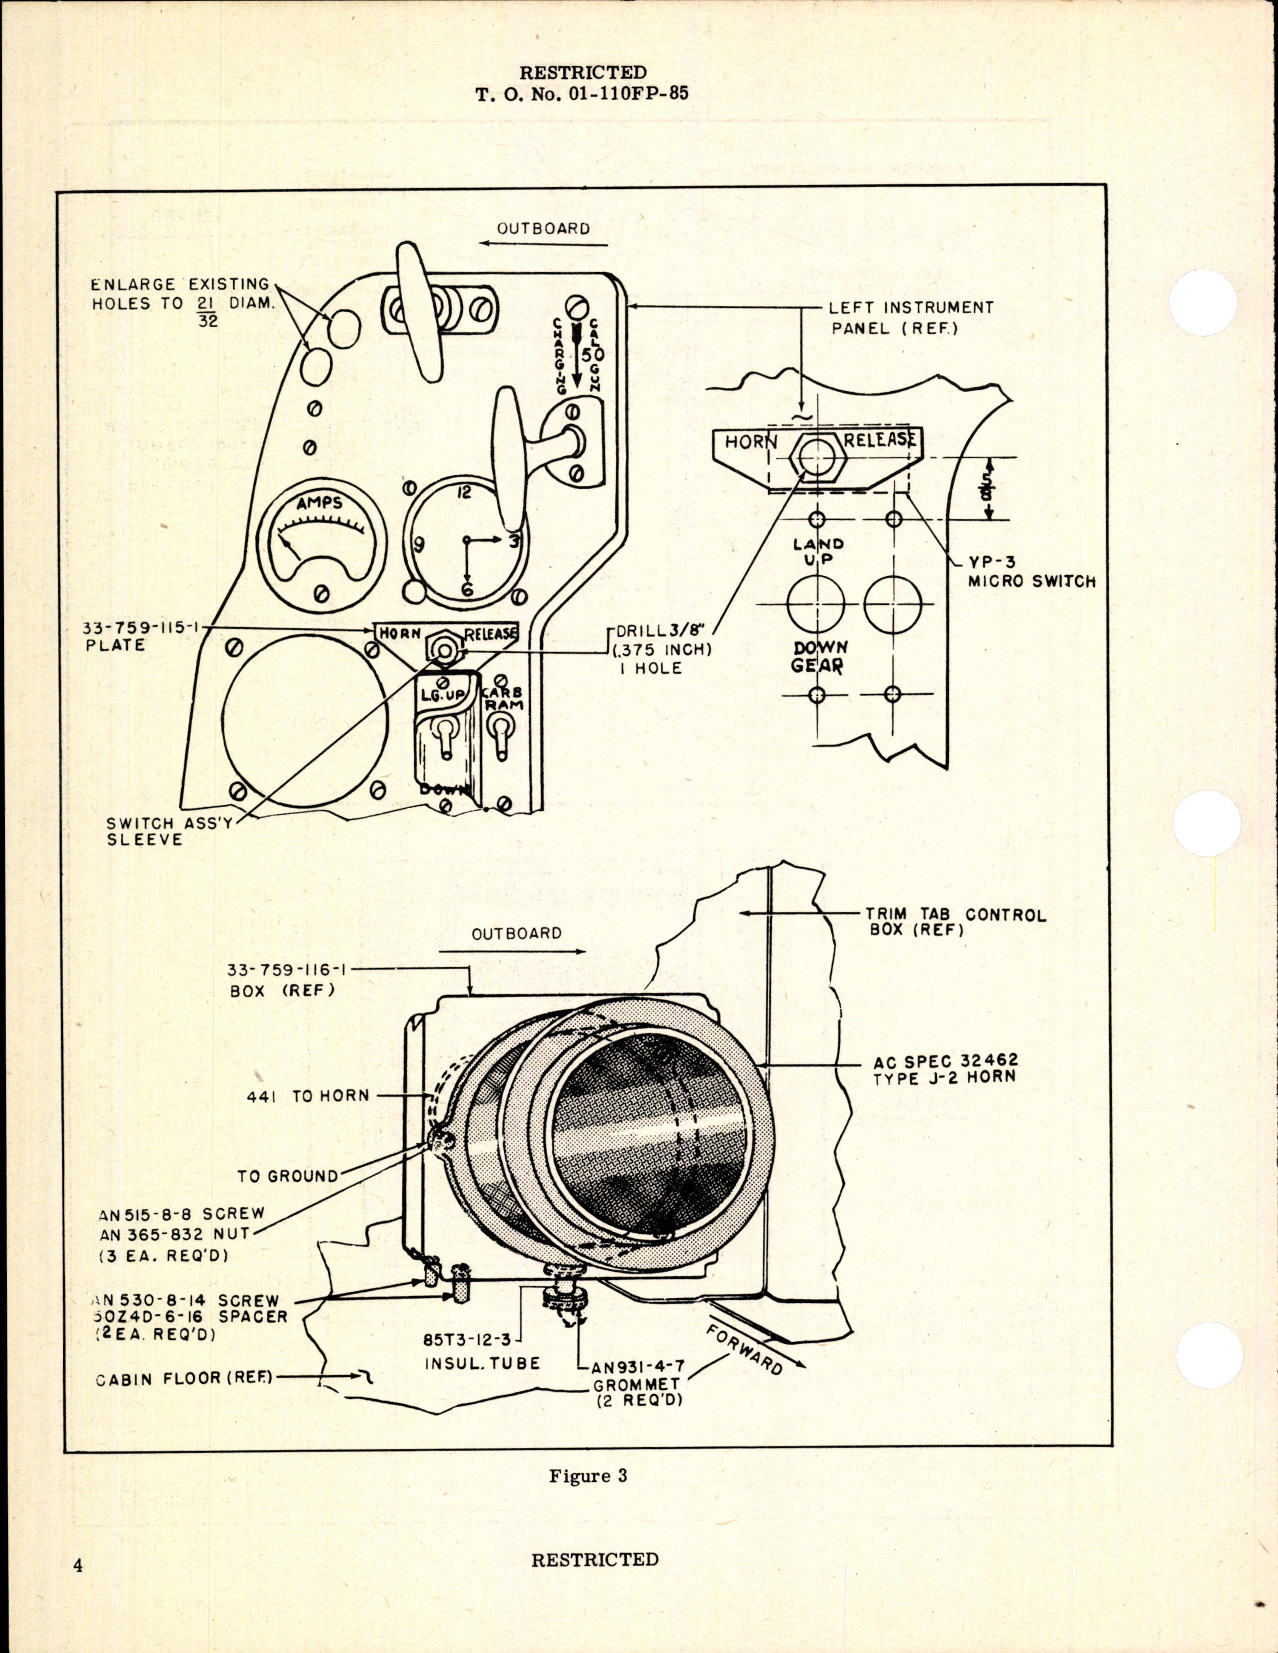 Sample page 4 from AirCorps Library document: Modification of Landing Gear Warning System for P-63A